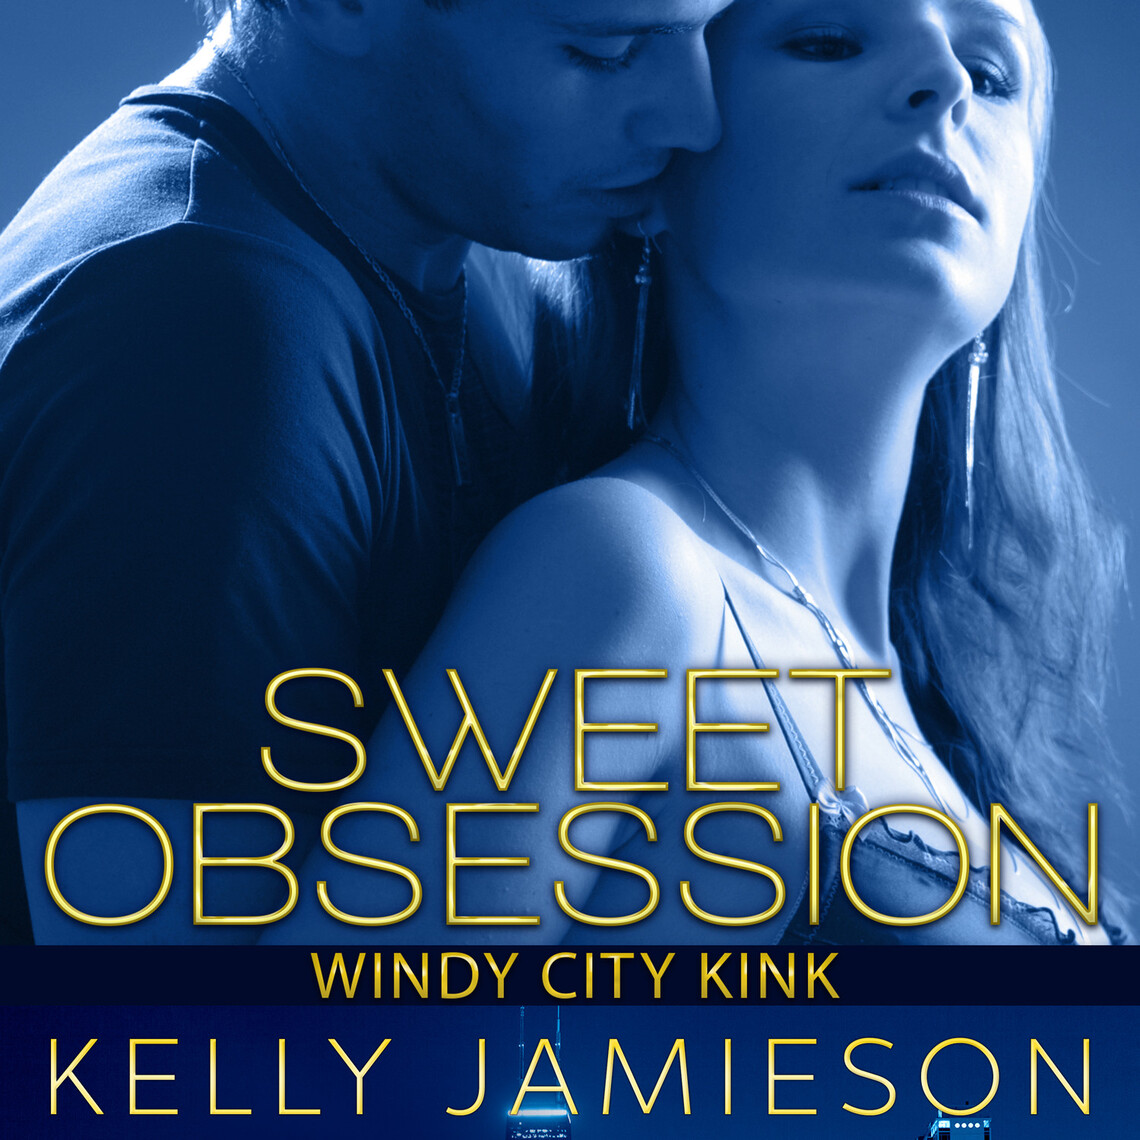 Sweet Obsession by Kelly Jamieson